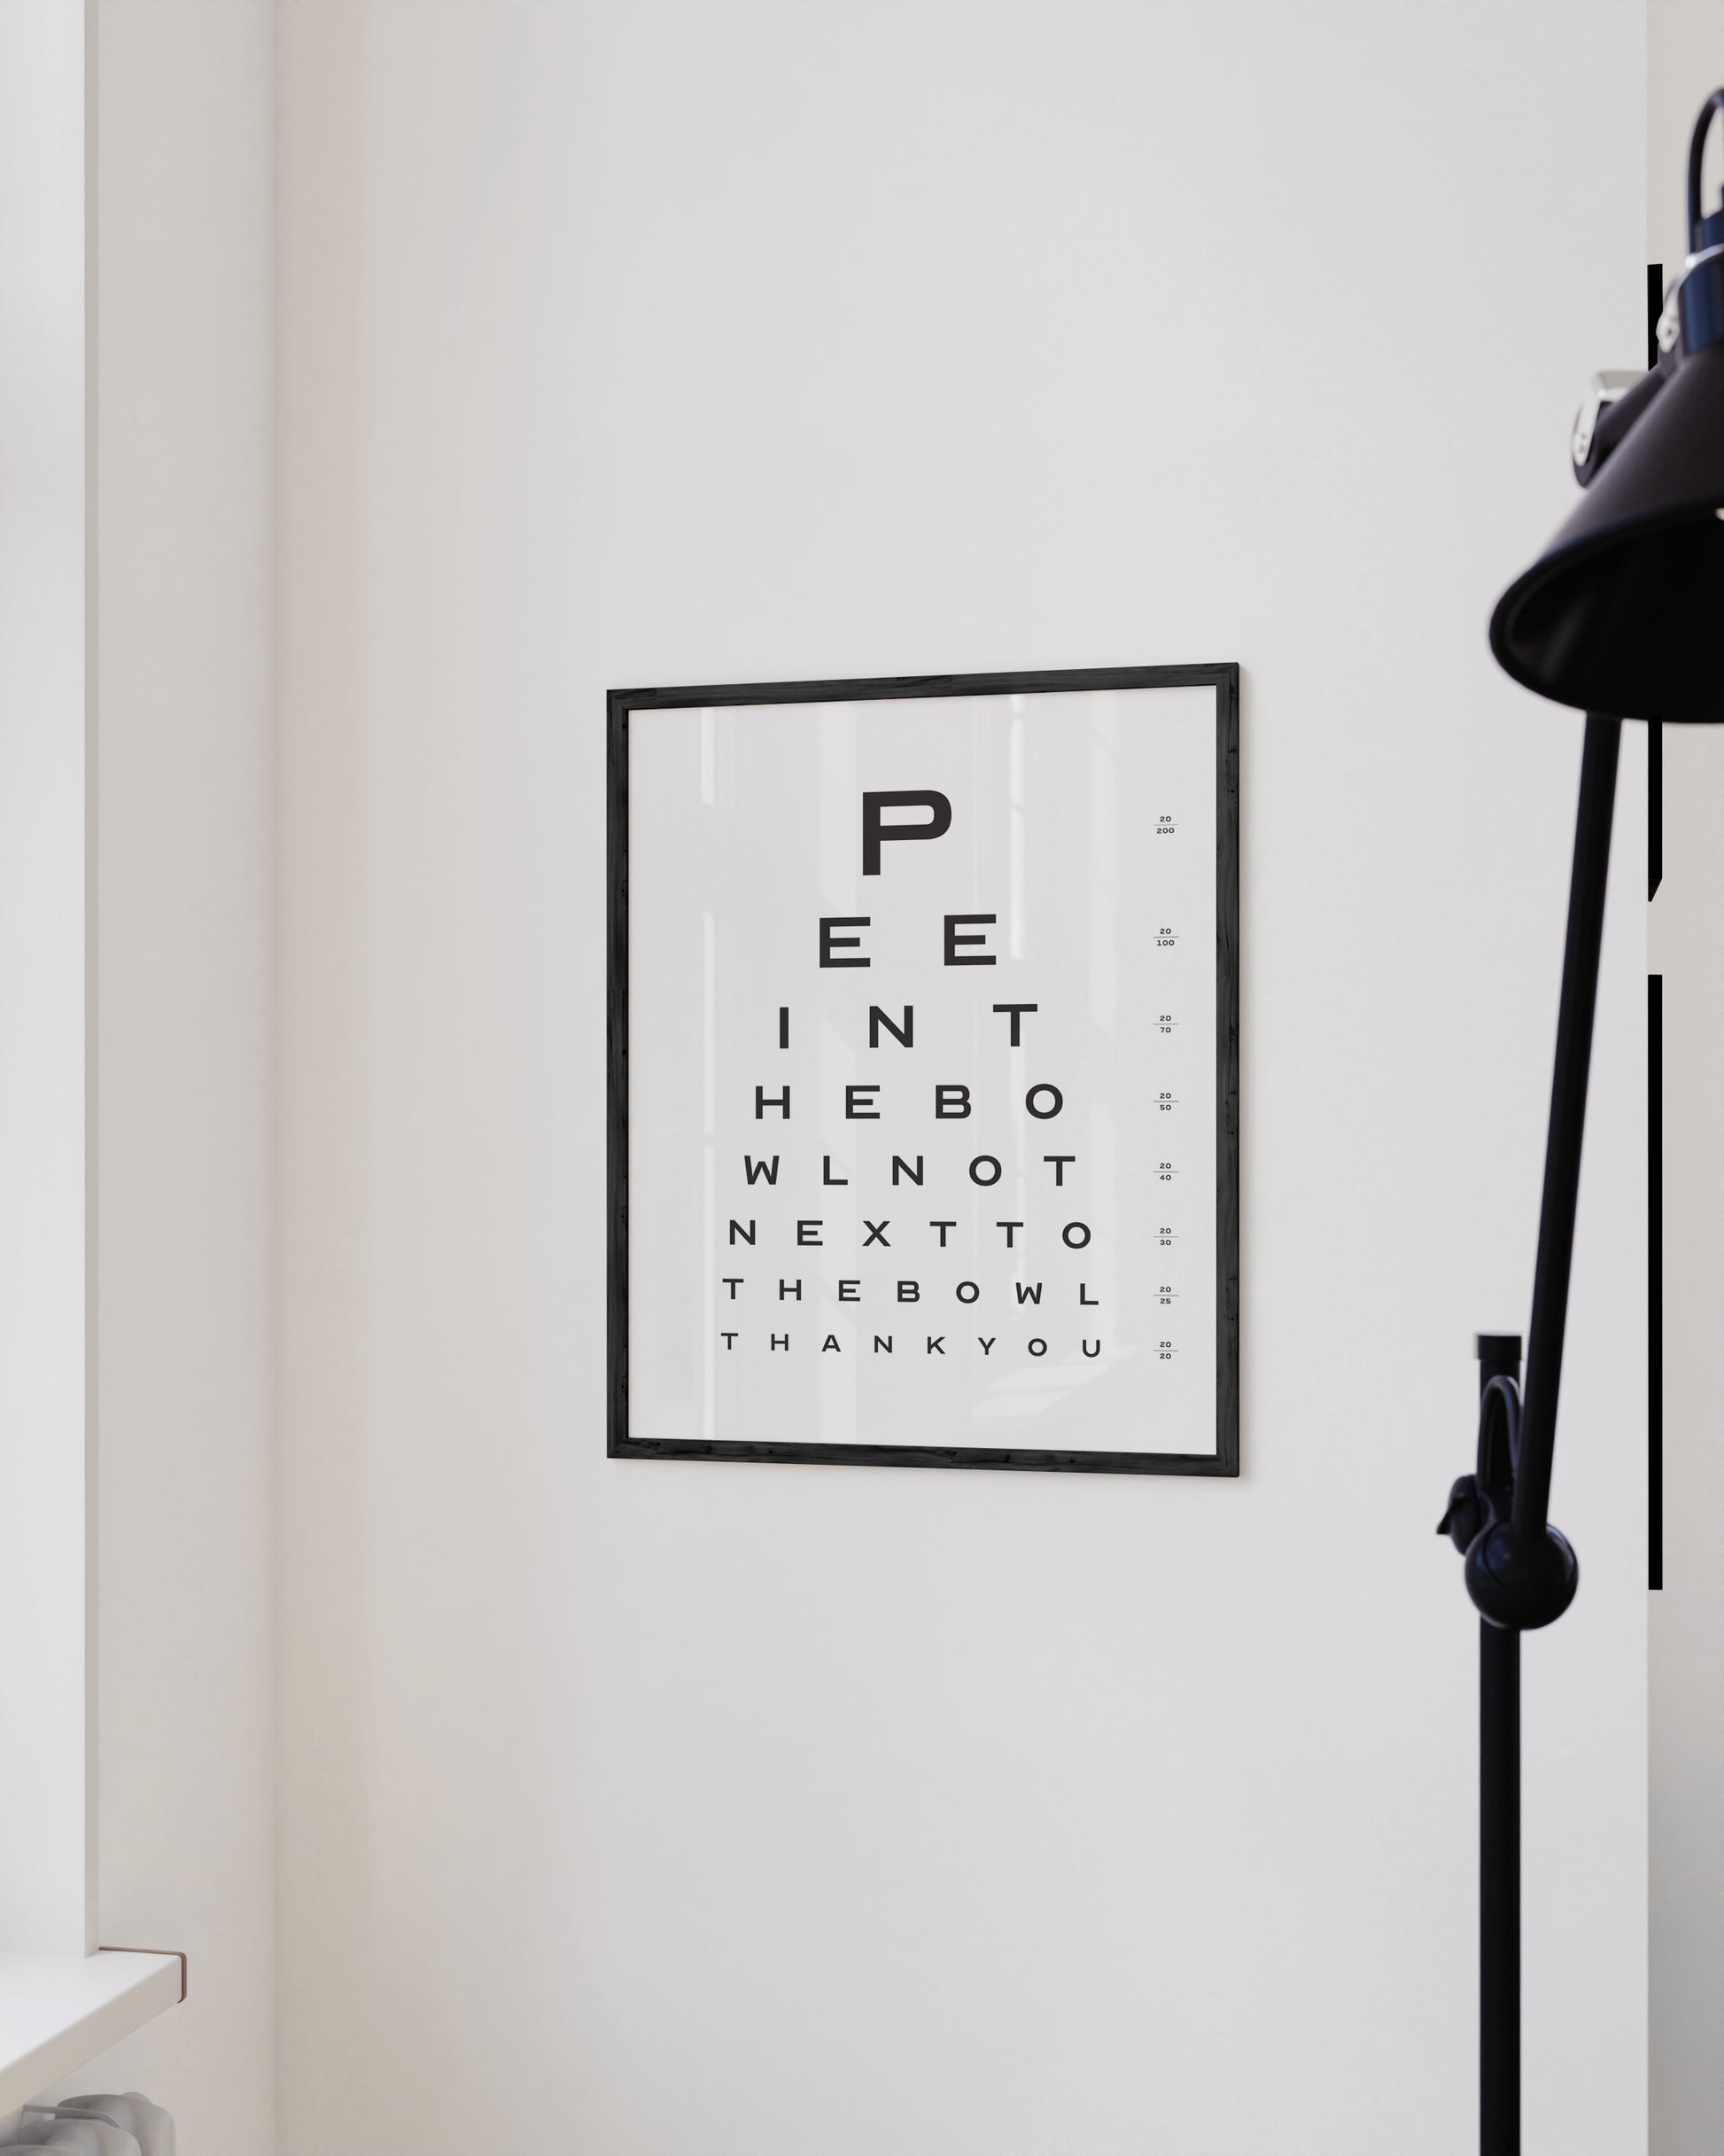 Funny Bathroom Toilet Eye Test Poster WC Humour WordArt Print Typography  Picture